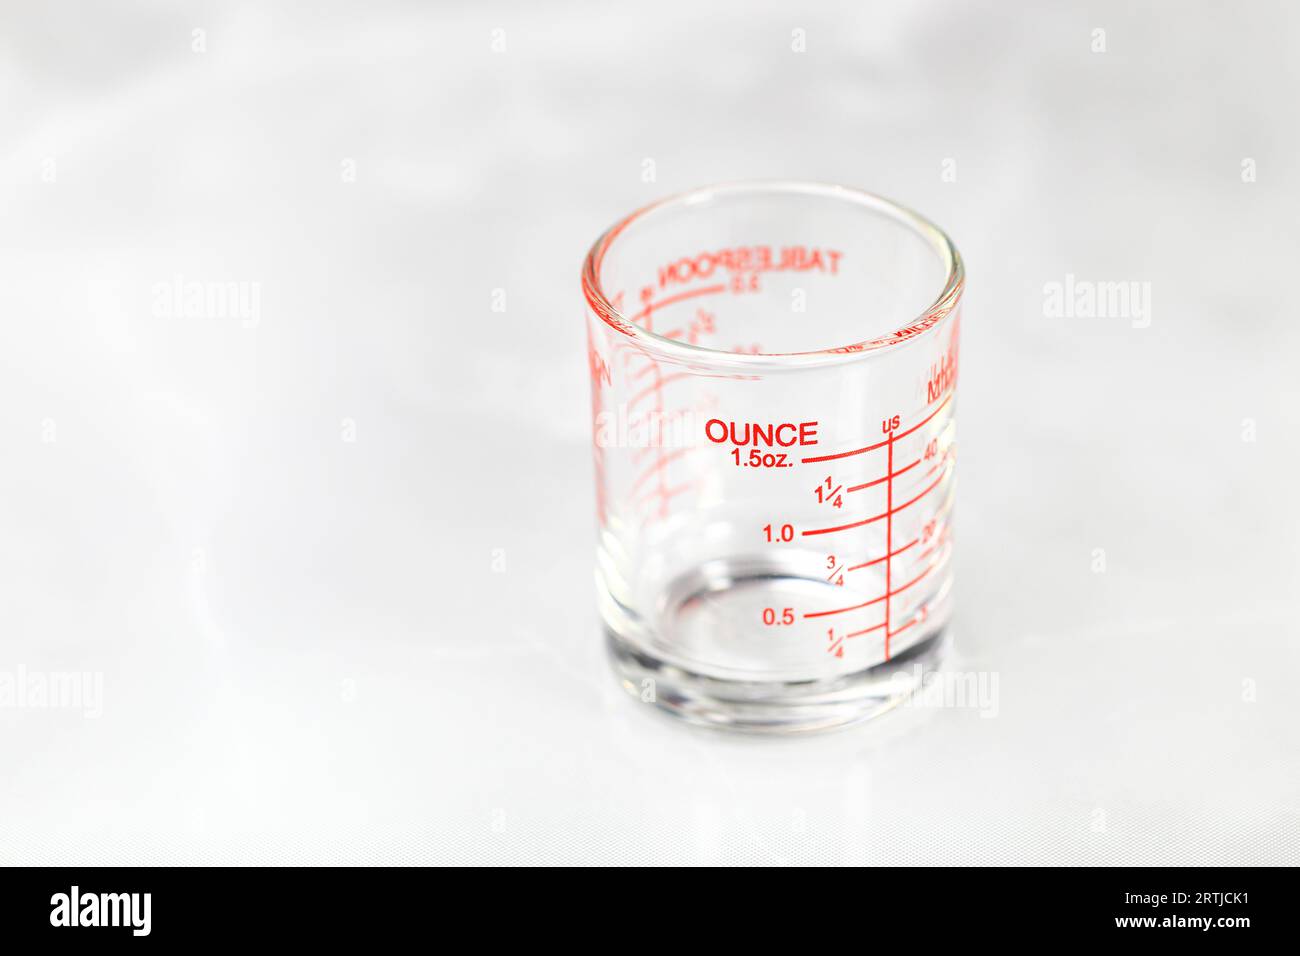 https://c8.alamy.com/comp/2RTJCK1/glass-measuring-cup-or-dosage-cup-with-ounce-measurements-displayed-2RTJCK1.jpg